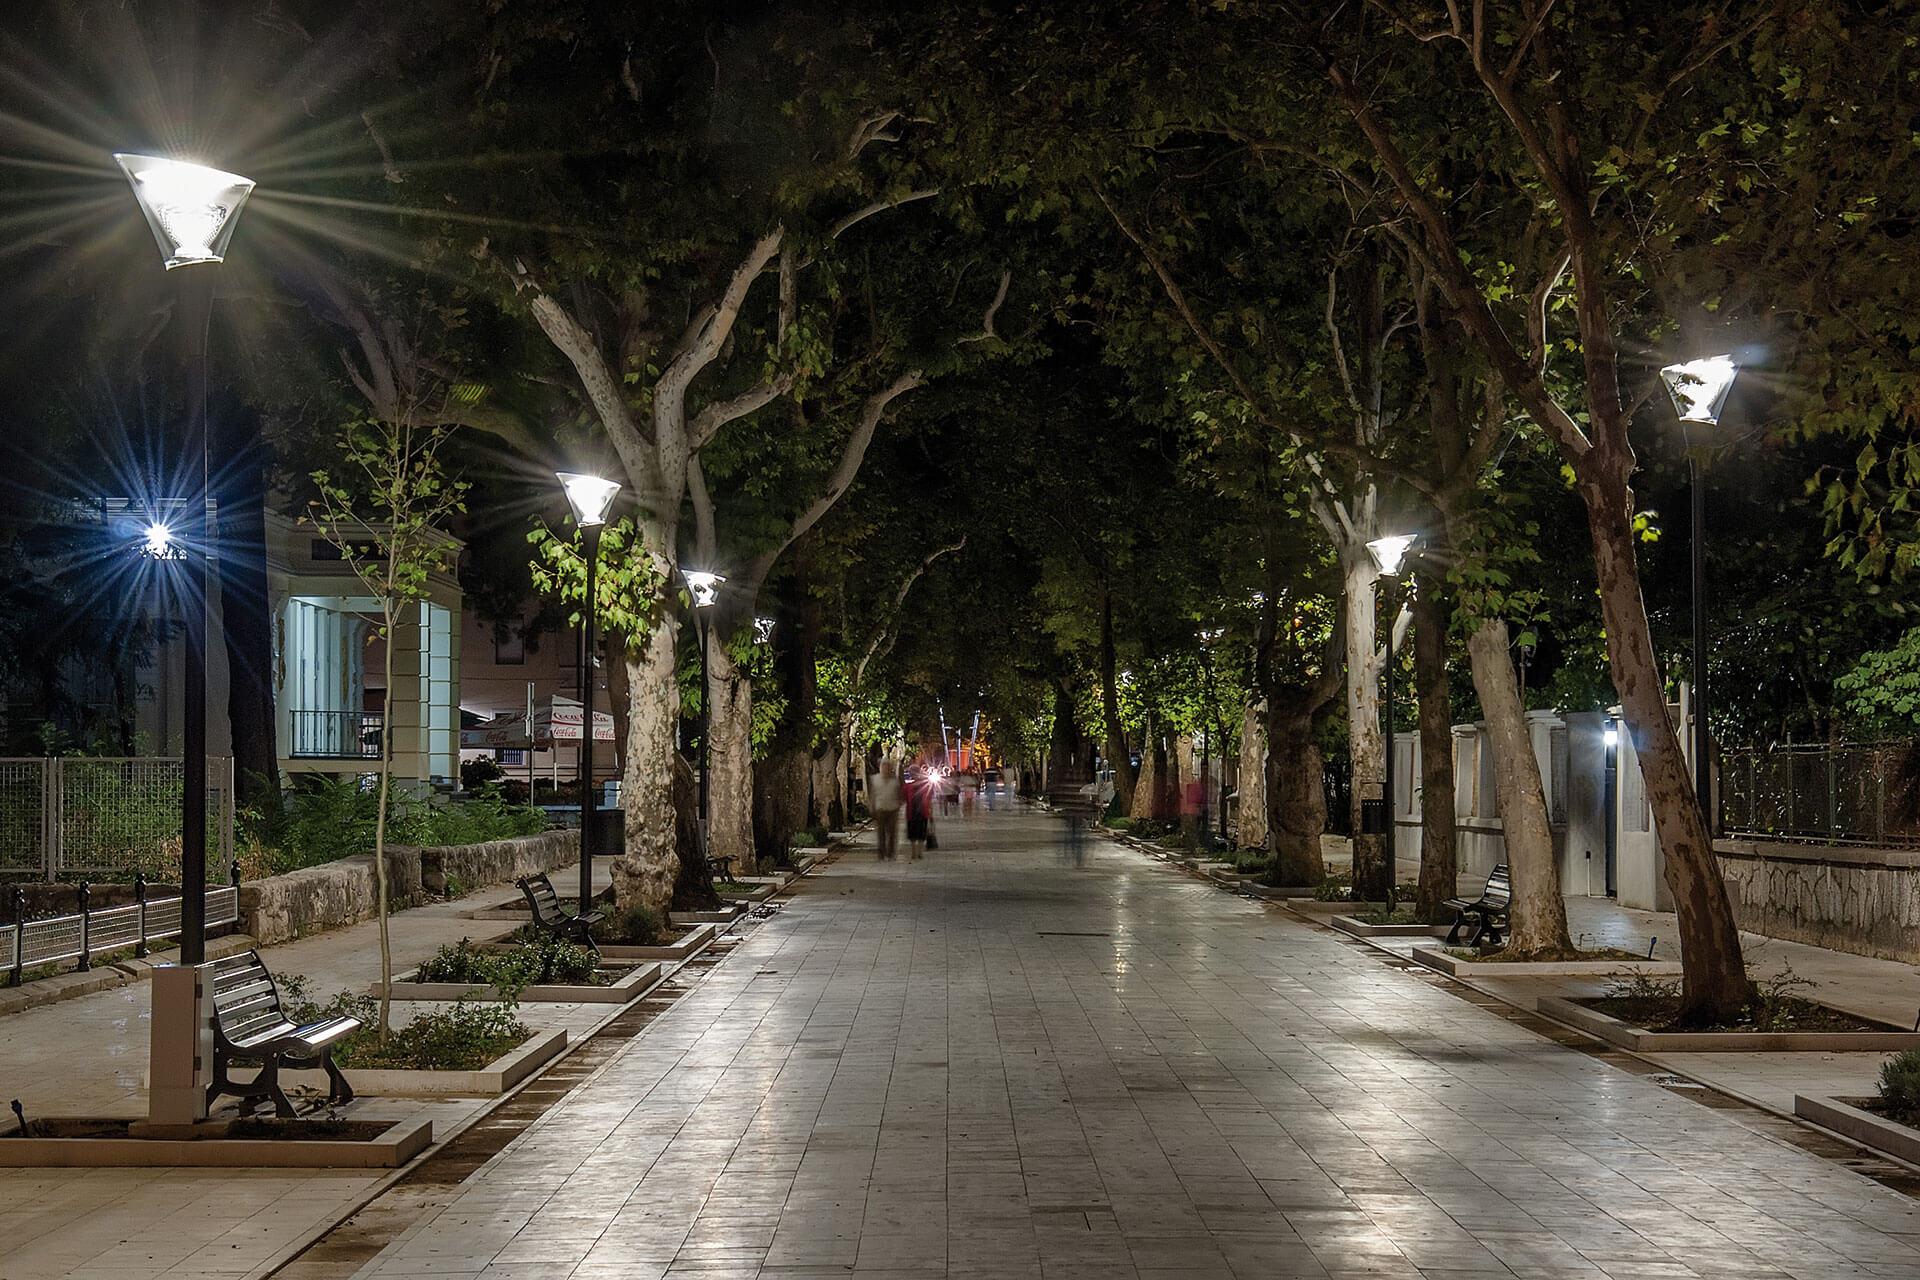 Calla LED creates an inviting nocturnal outdoor space for residents in Mostar while cutting energy consumption